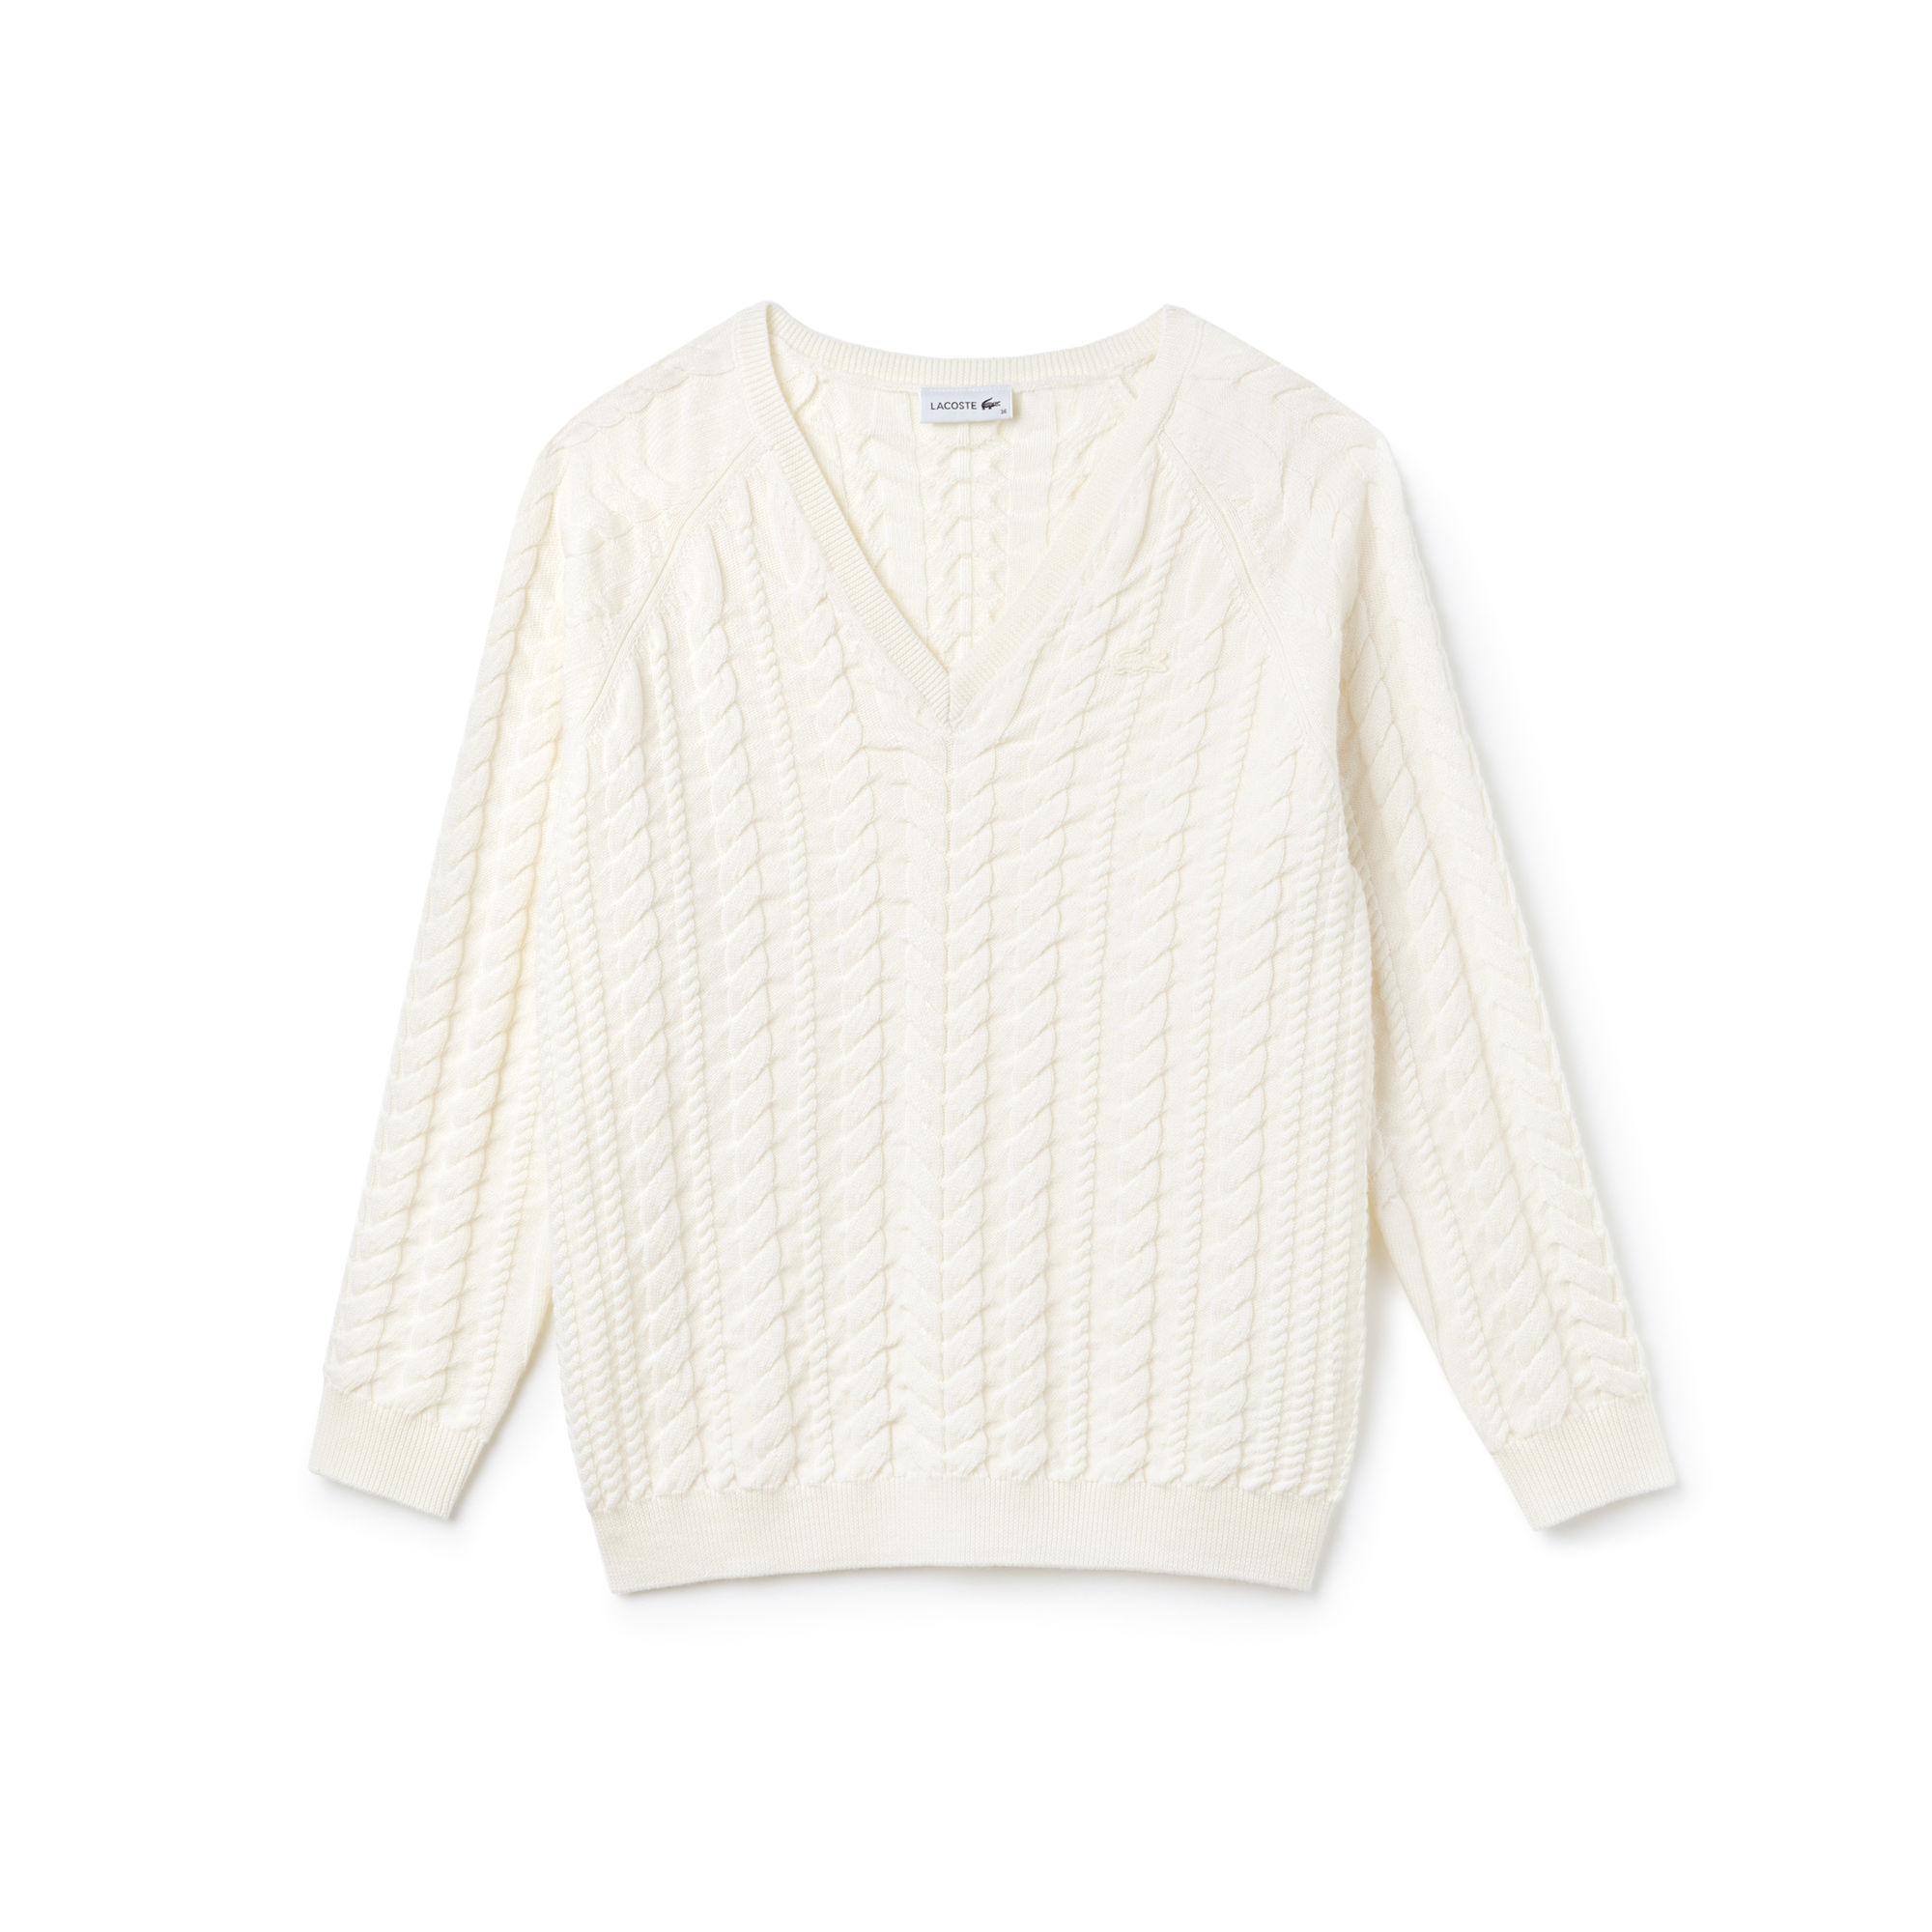 Lyst - Lacoste V-neck Cotton And Wool Cable Knit Sweater in White